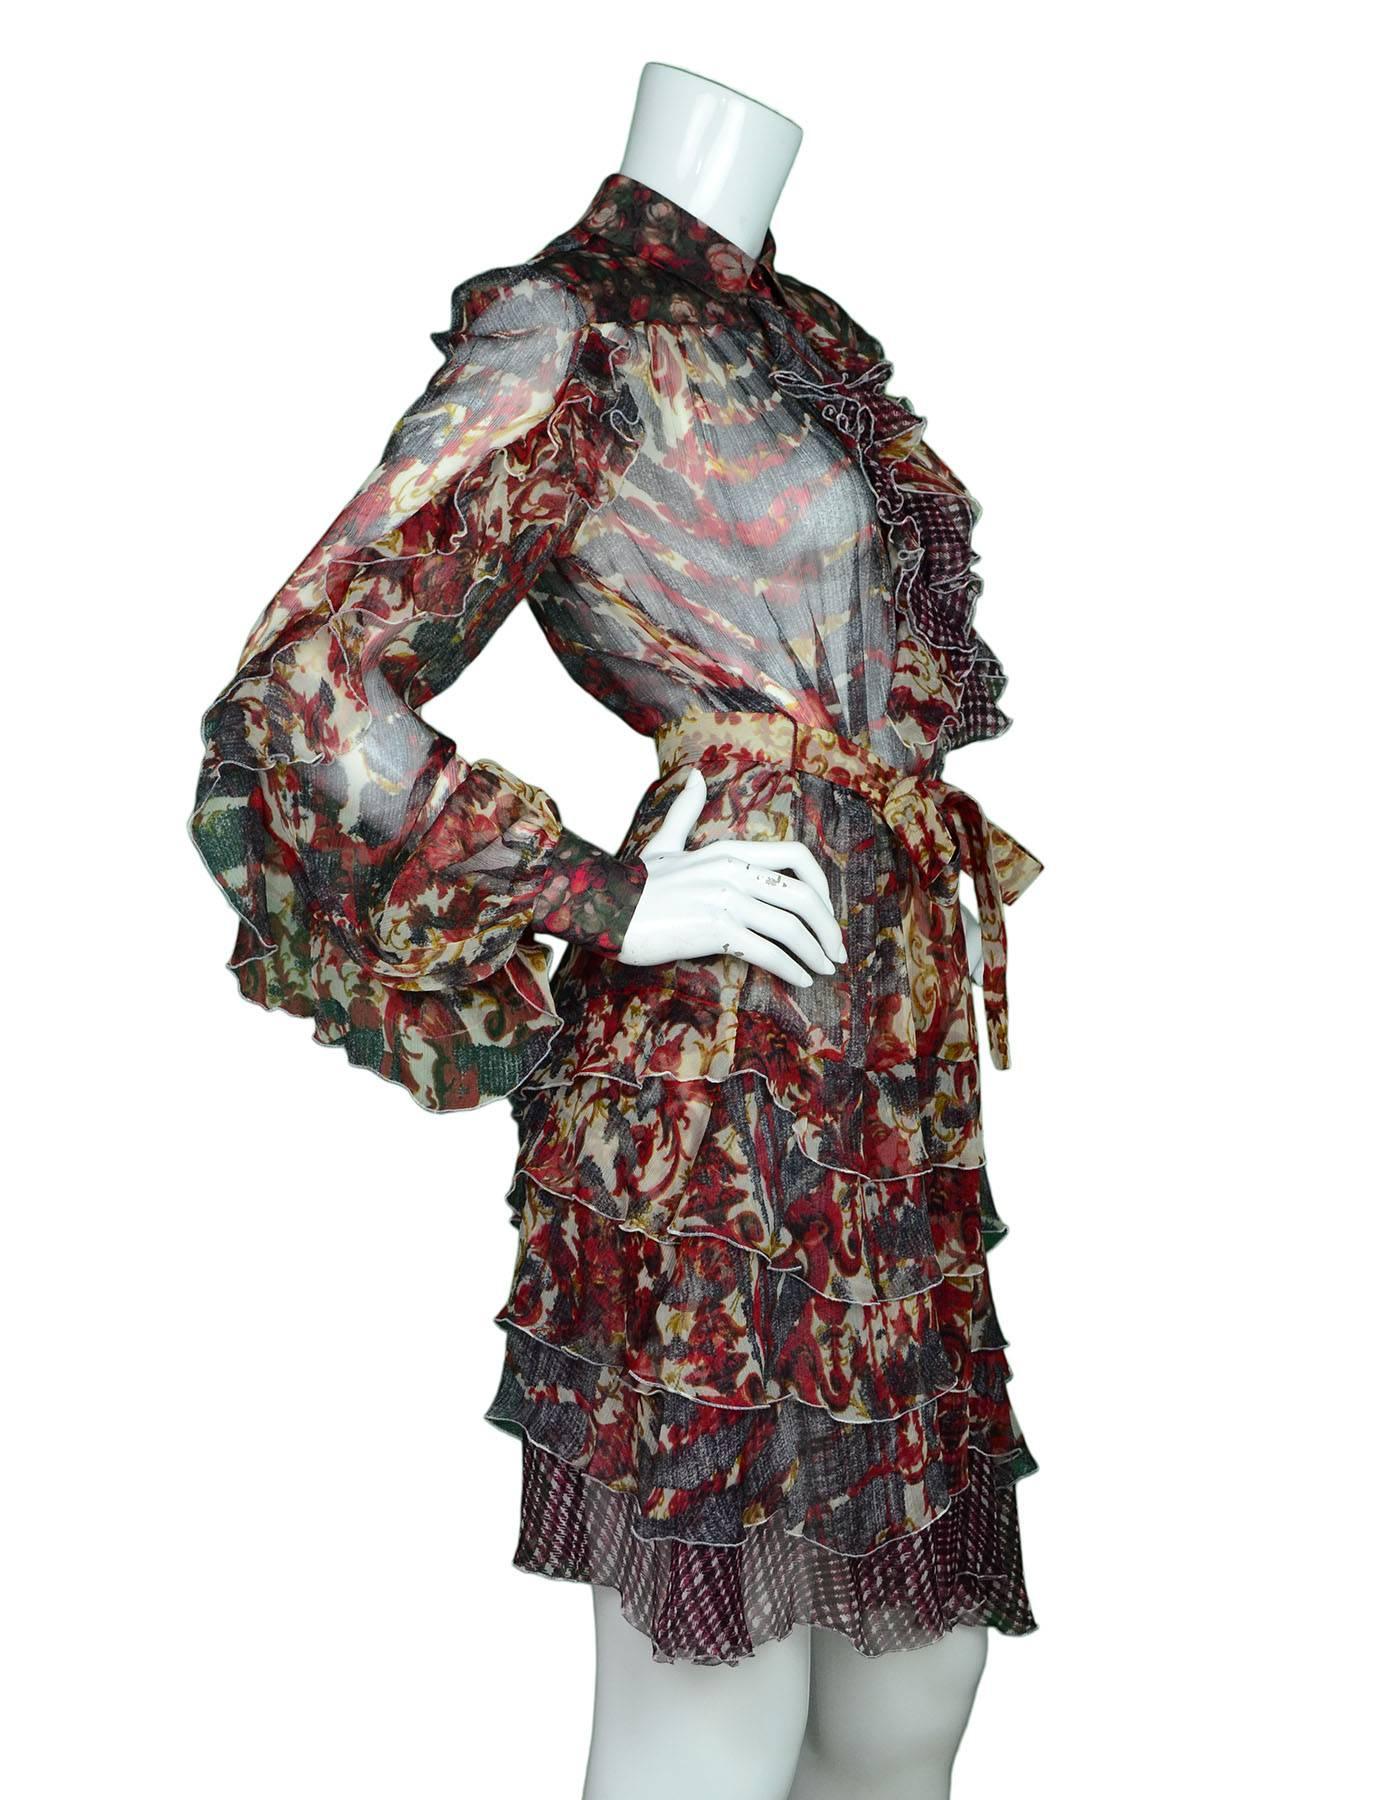 Just Cavalli NEW Multi-Color Sheer Silk Dress 
Features ruffles down sleeves and matching silk waist belt tie
Made In: Italy
Color: Red, black, green, peach
Composition: 100% silk
Lining: None
Closure/Opening: Pull over with button down at